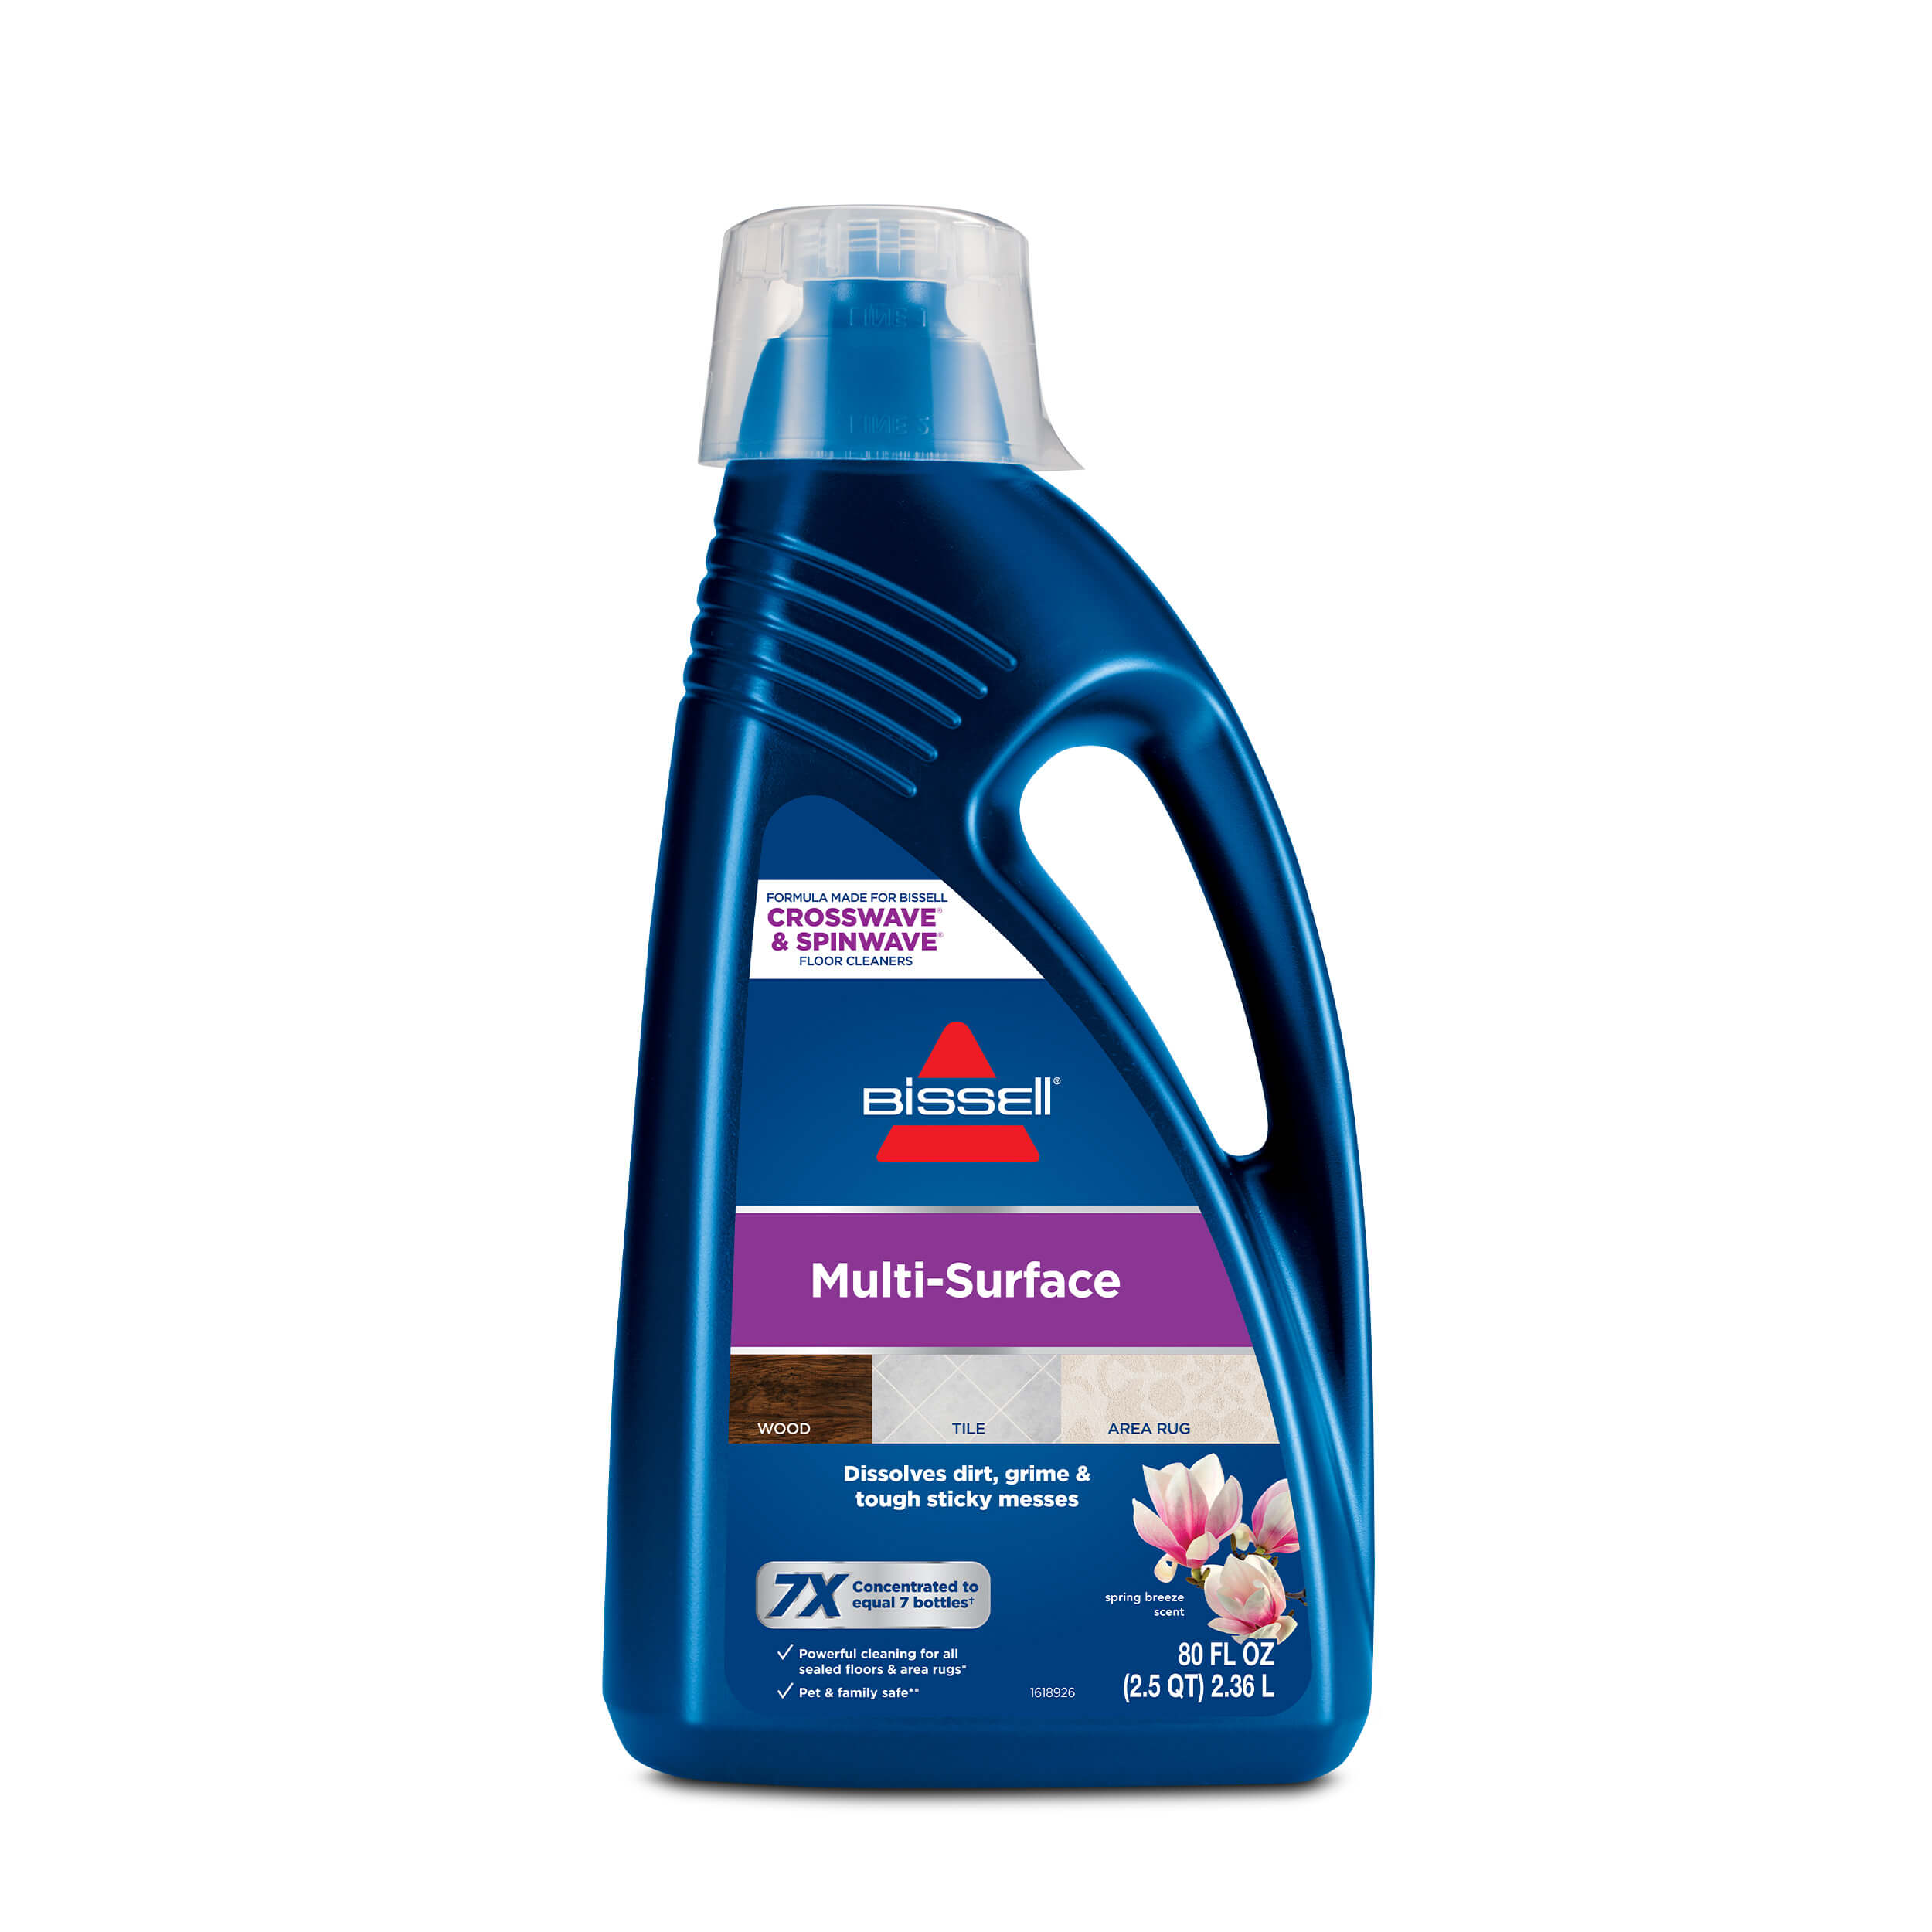 BISSELL Multi-Surface Floor Cleaning Formula for CrossWave & SpinWave Series - 80 oz.